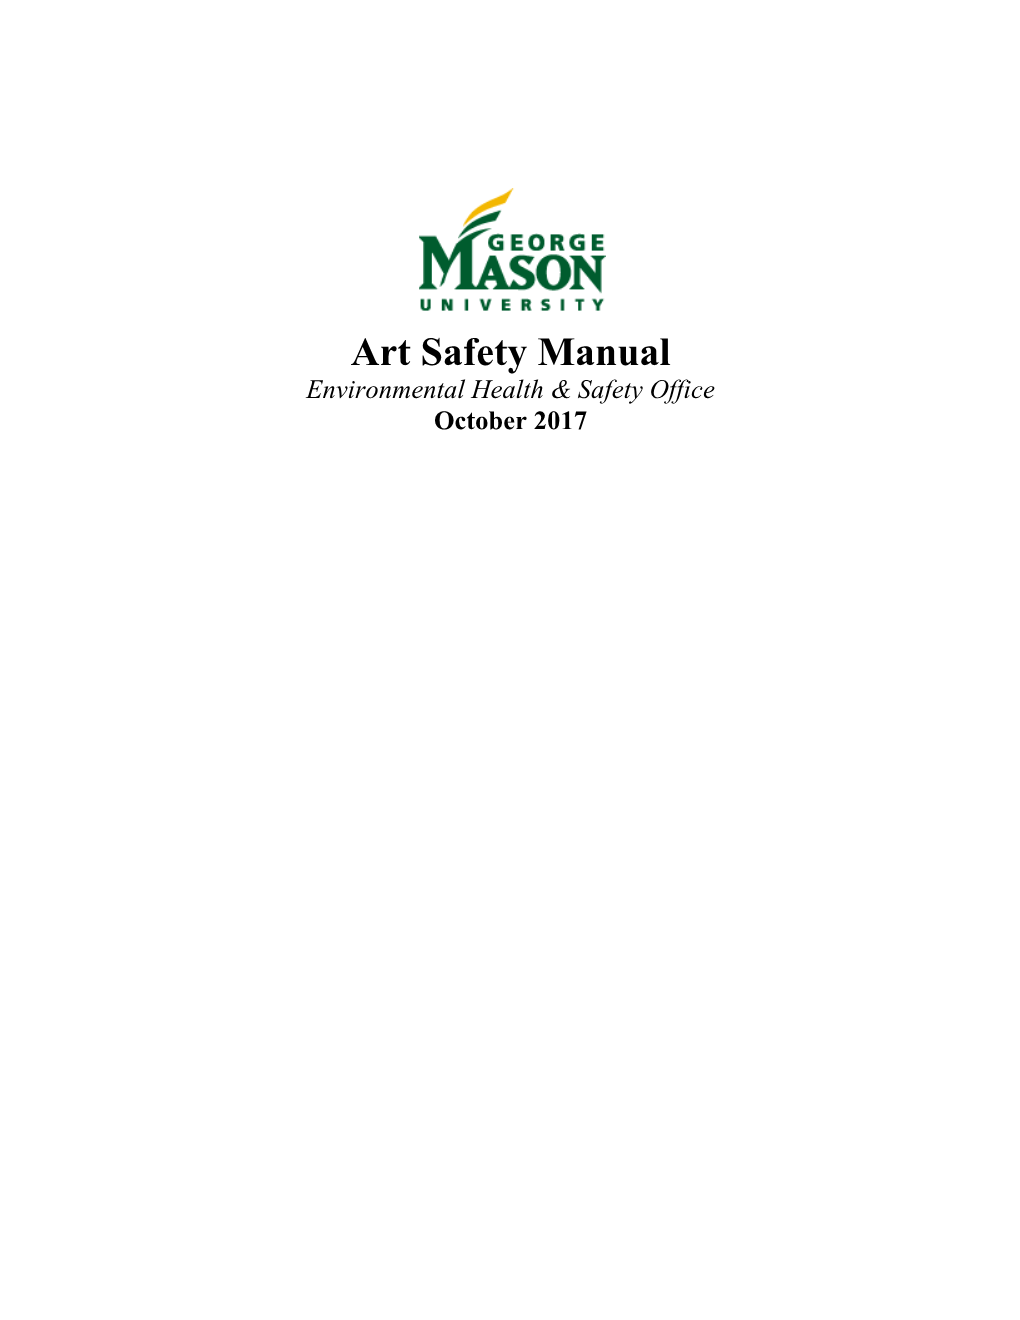 Art Safety Manual Environmental Health & Safety Office October 2017